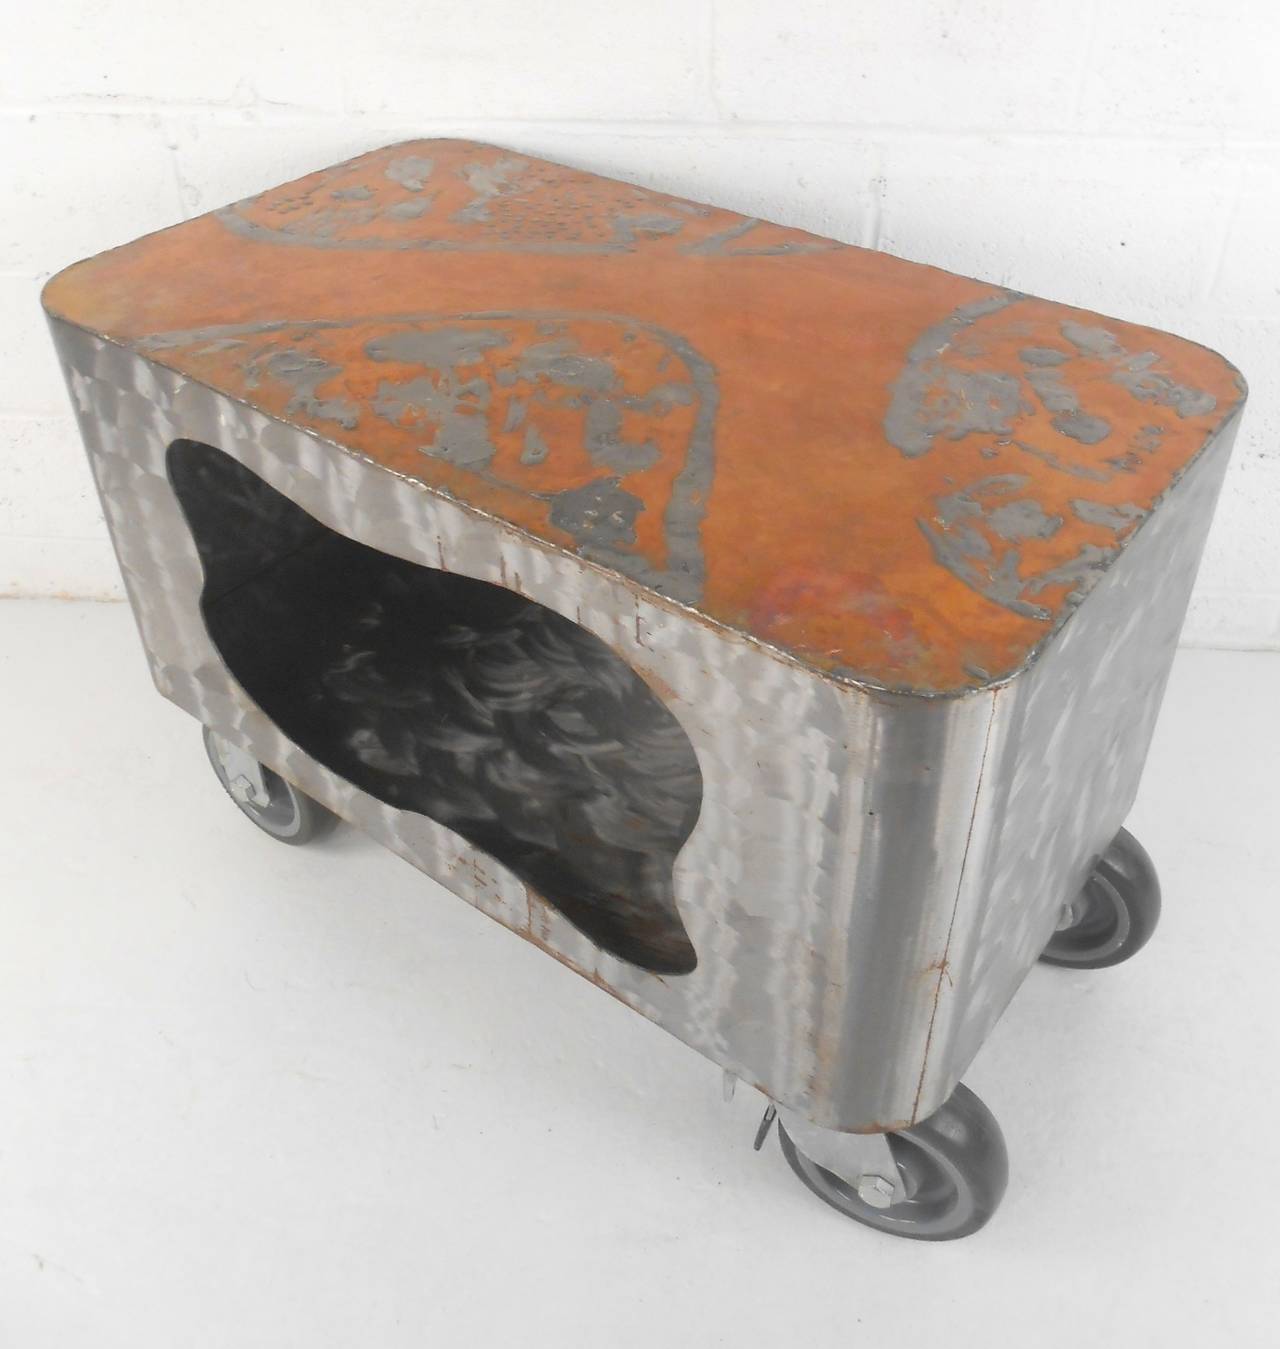 Highly unusual cart with strong industrial style. Copper top distressed finish, ground steel body with ample storage, set on large locking casters.
Very unique and handsome addition to your living room.

(Please confirm item location - NY or NJ -